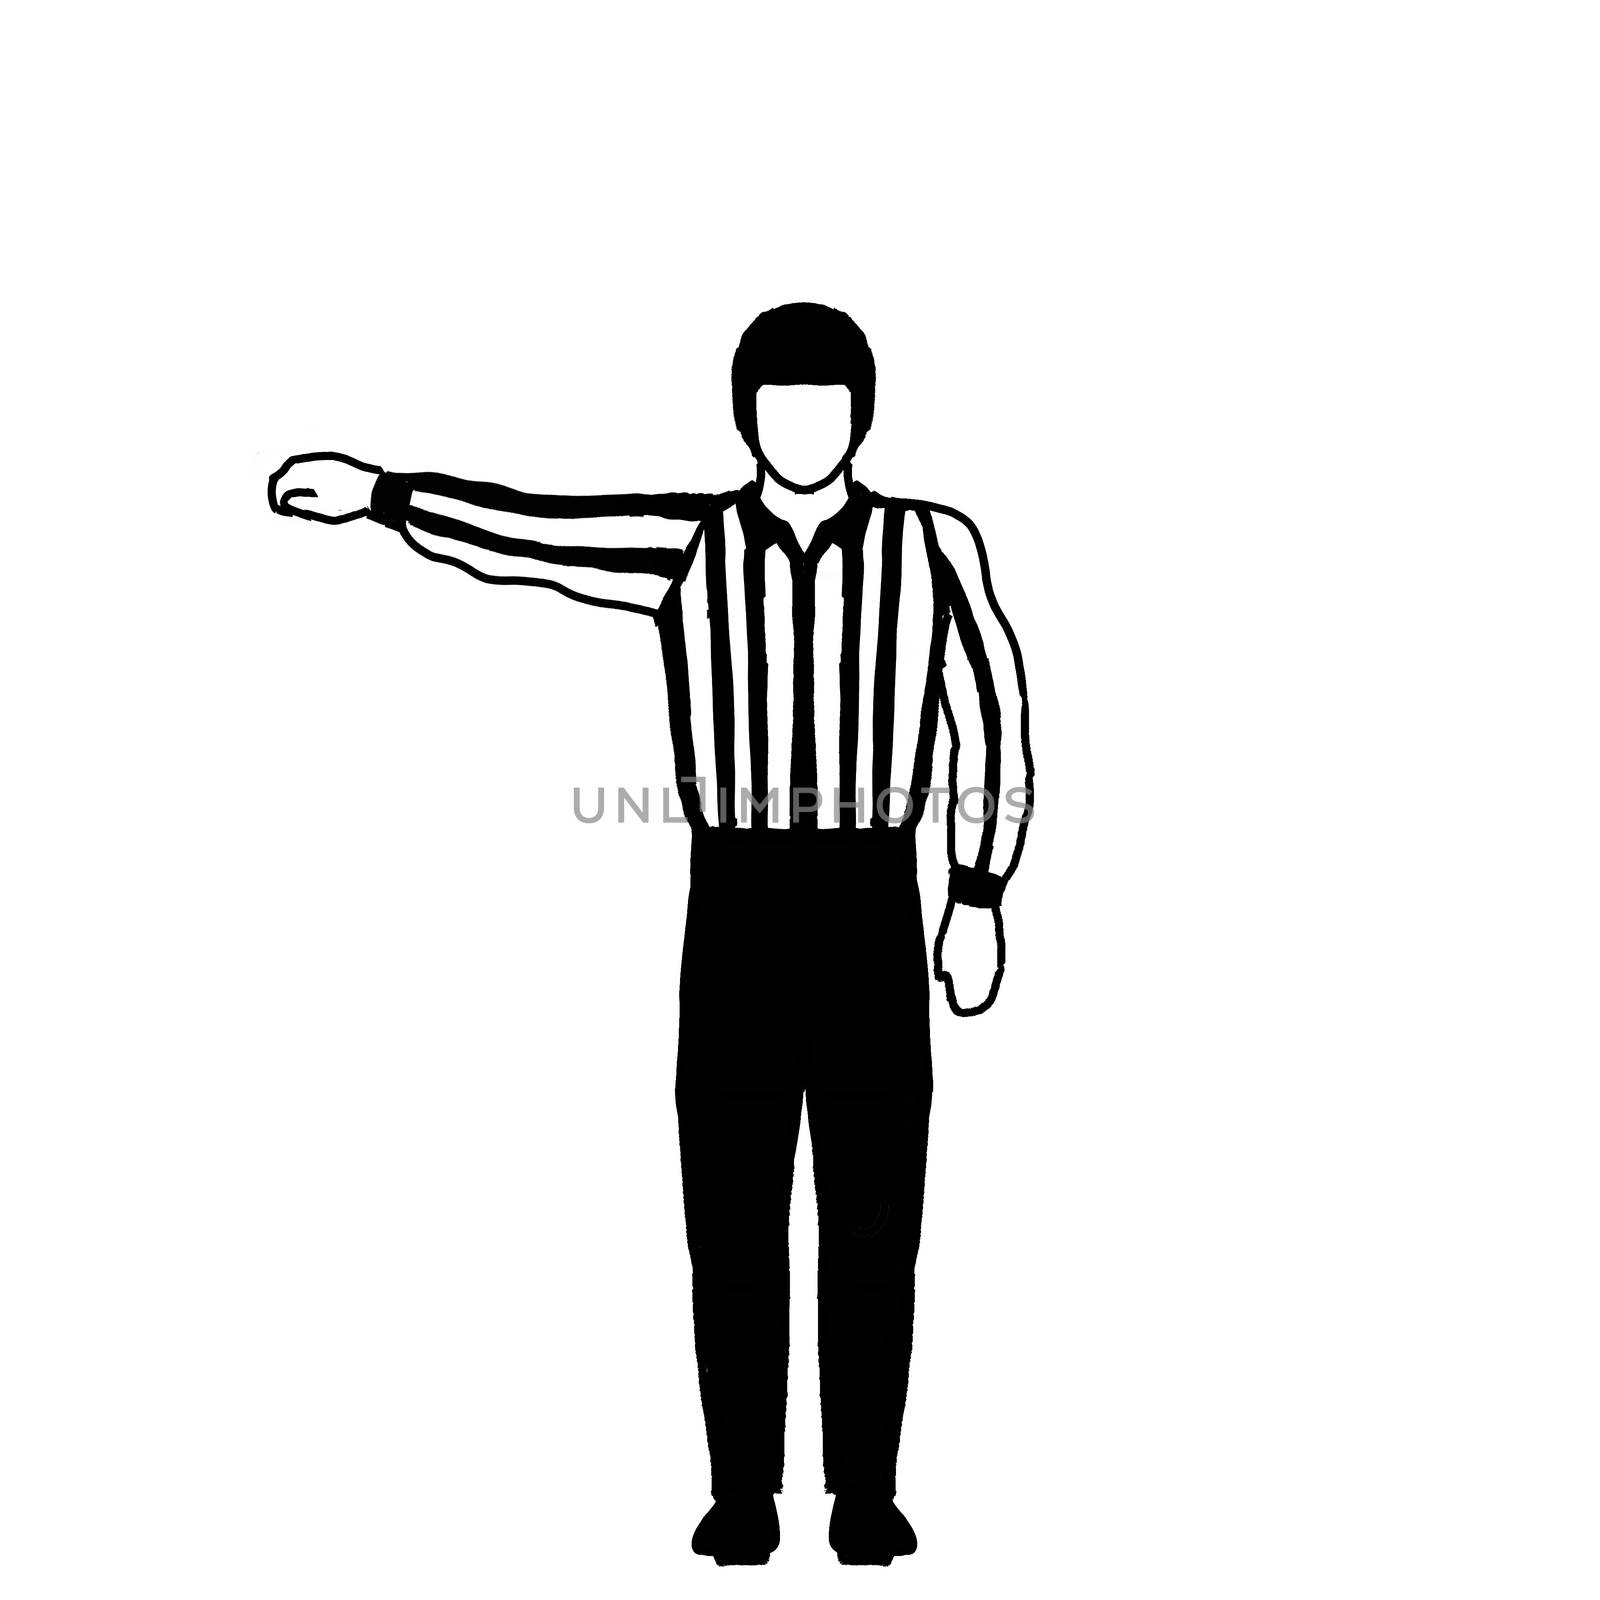 Drawing illustration showing an ice hockey official or referee with different hand signal on isolated background done in black and white.